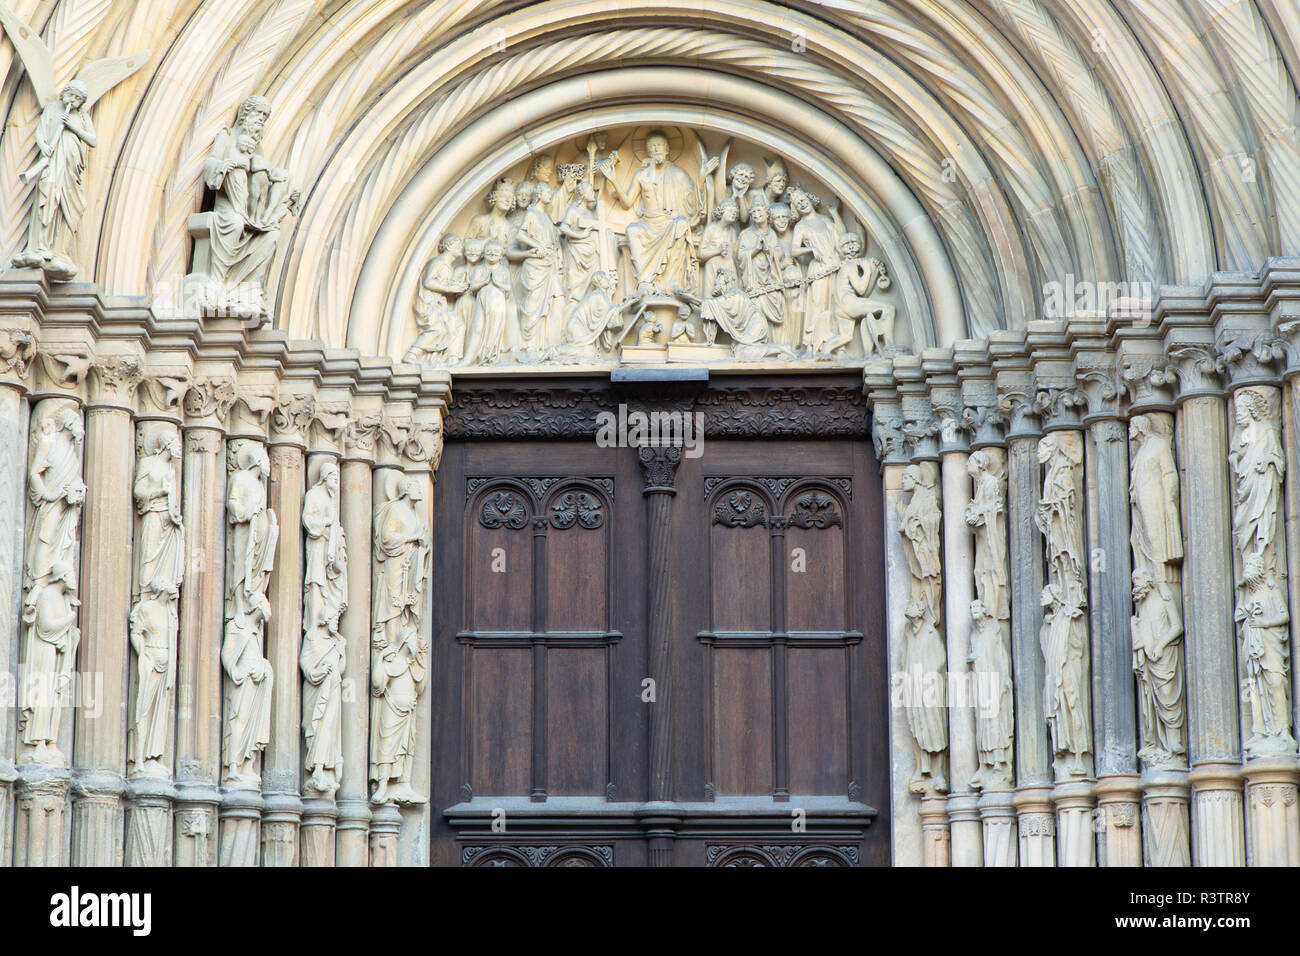 Door of Kaiserdom (Imperial Cathedral), Bamberg (UNESCO World Heritage Site), Bavaria, Germany Stock Photo